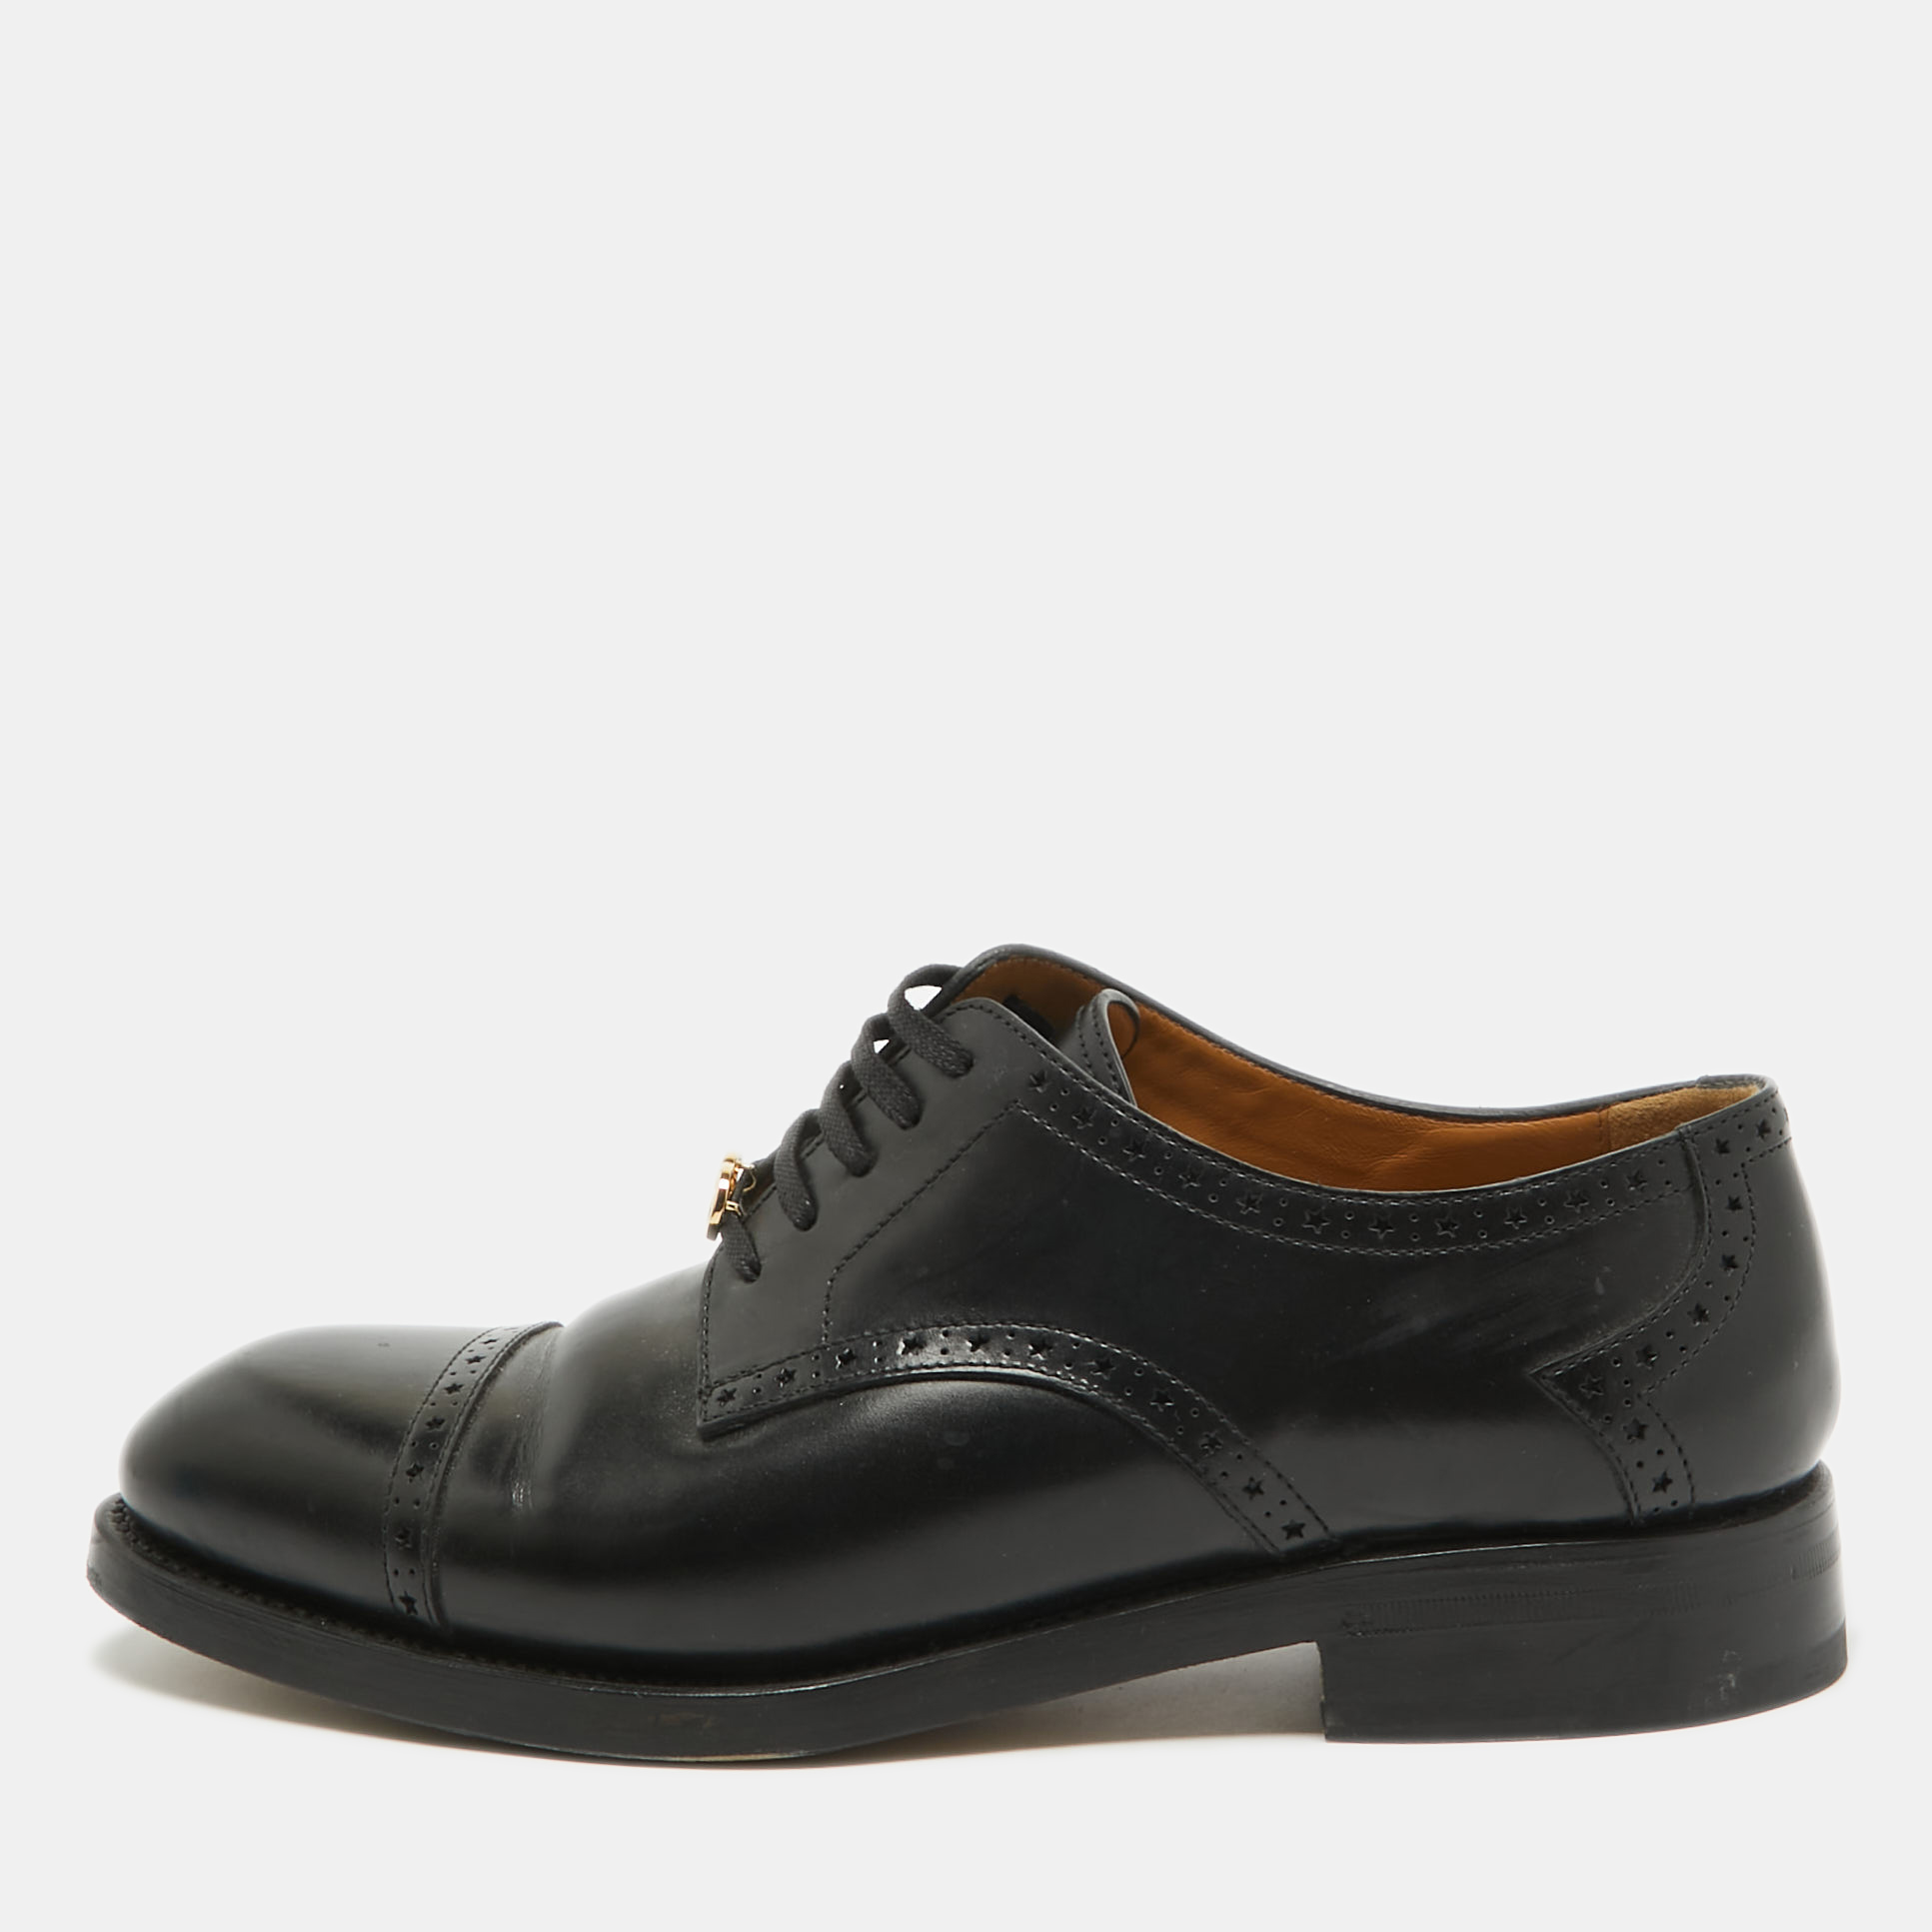 

Gucci Black Leather Brogue Lace Up Oxfords Size 44